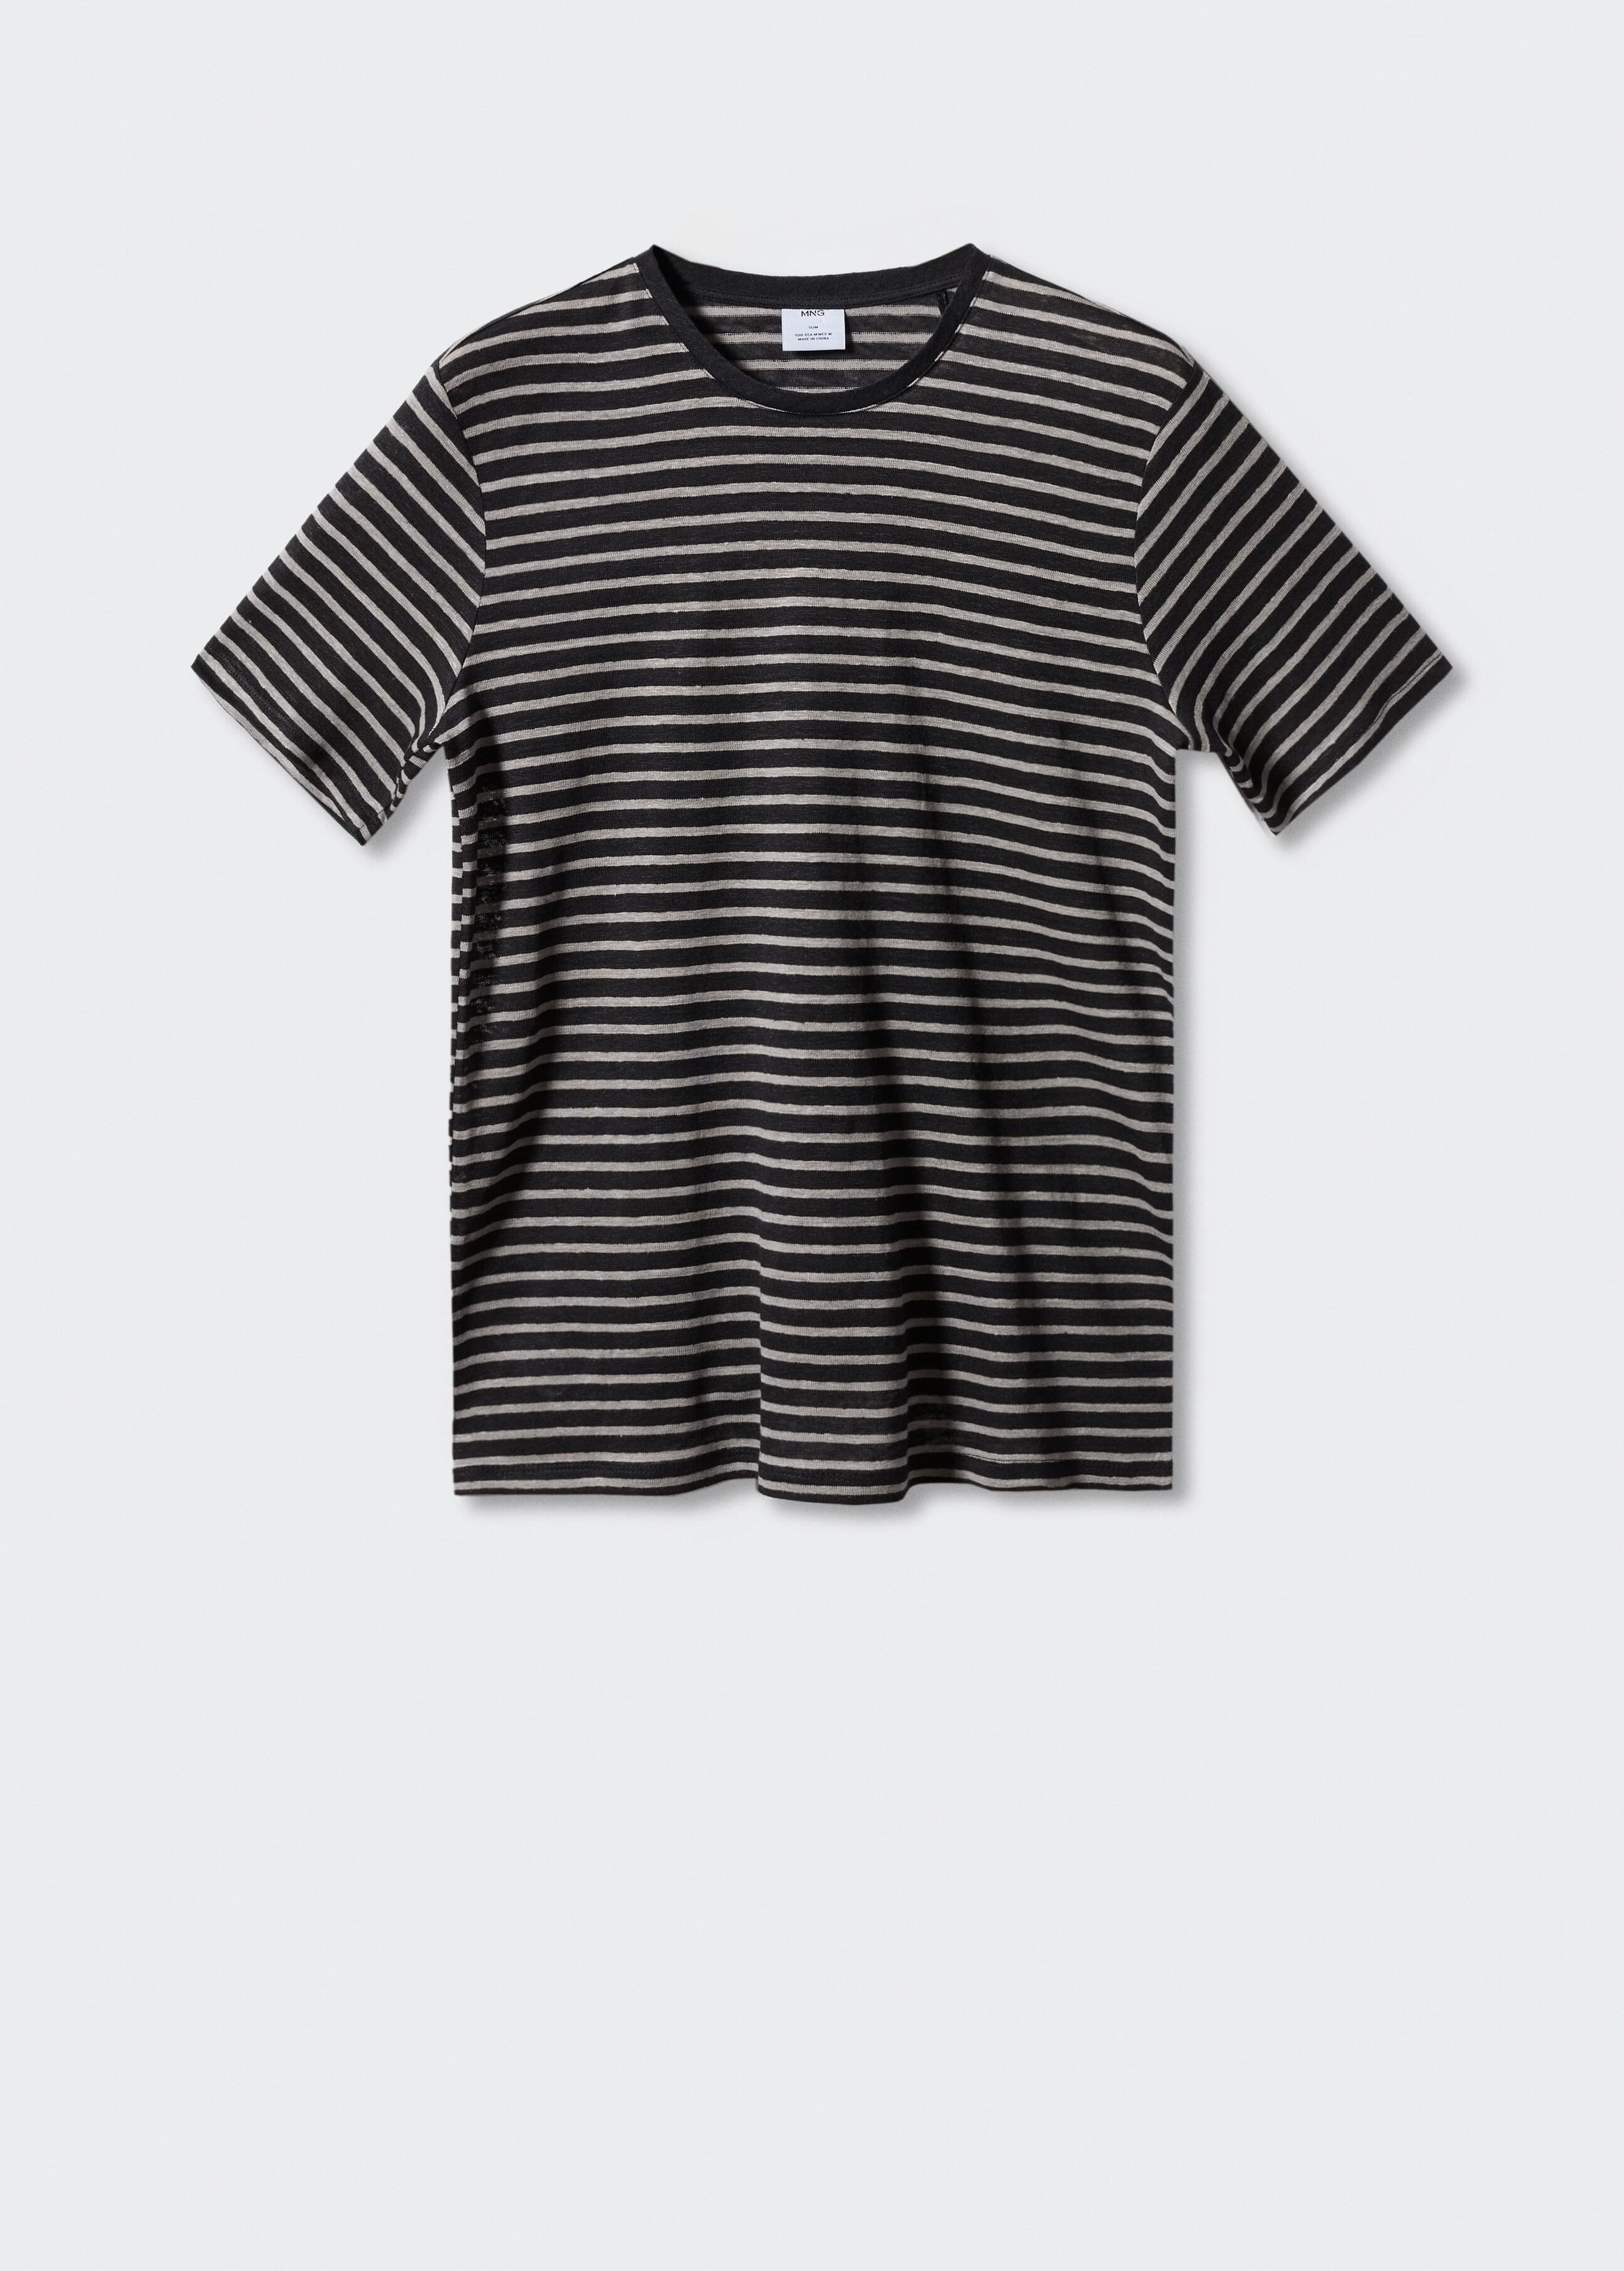 100% linen striped t-shirt - Article without model